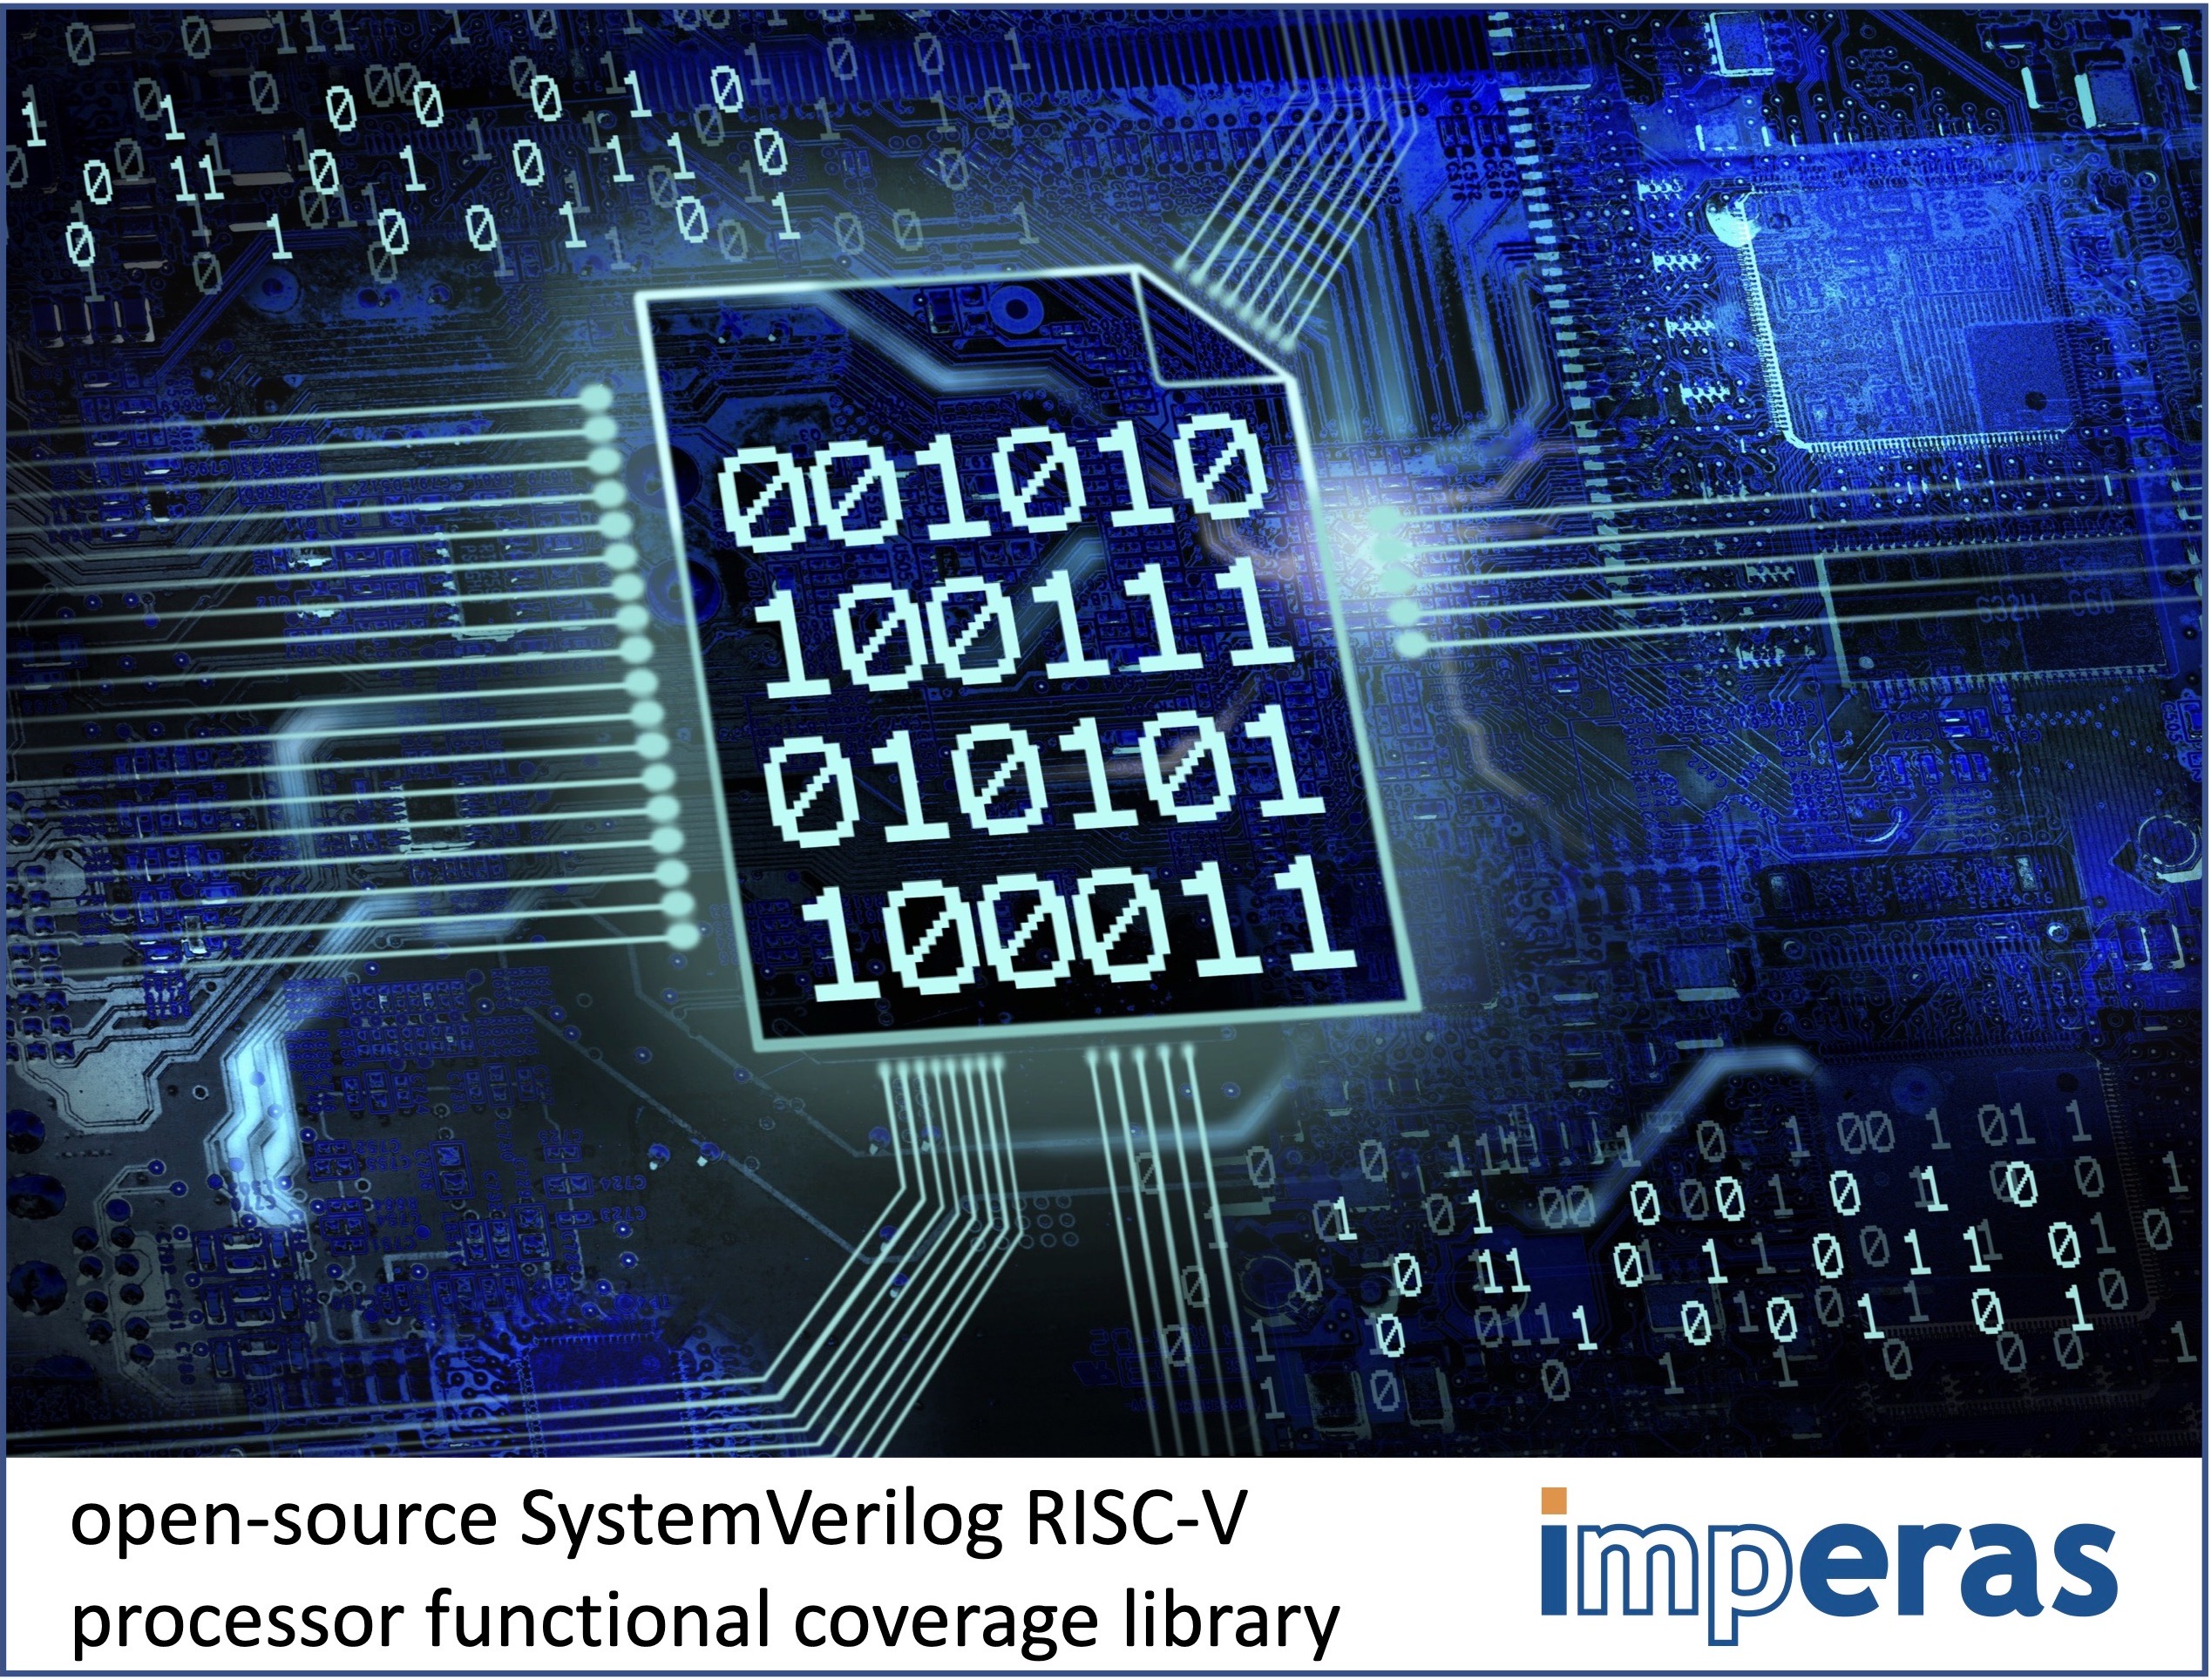 Imperas - open-source SystemVerilog RISC-V processor functional coverage library